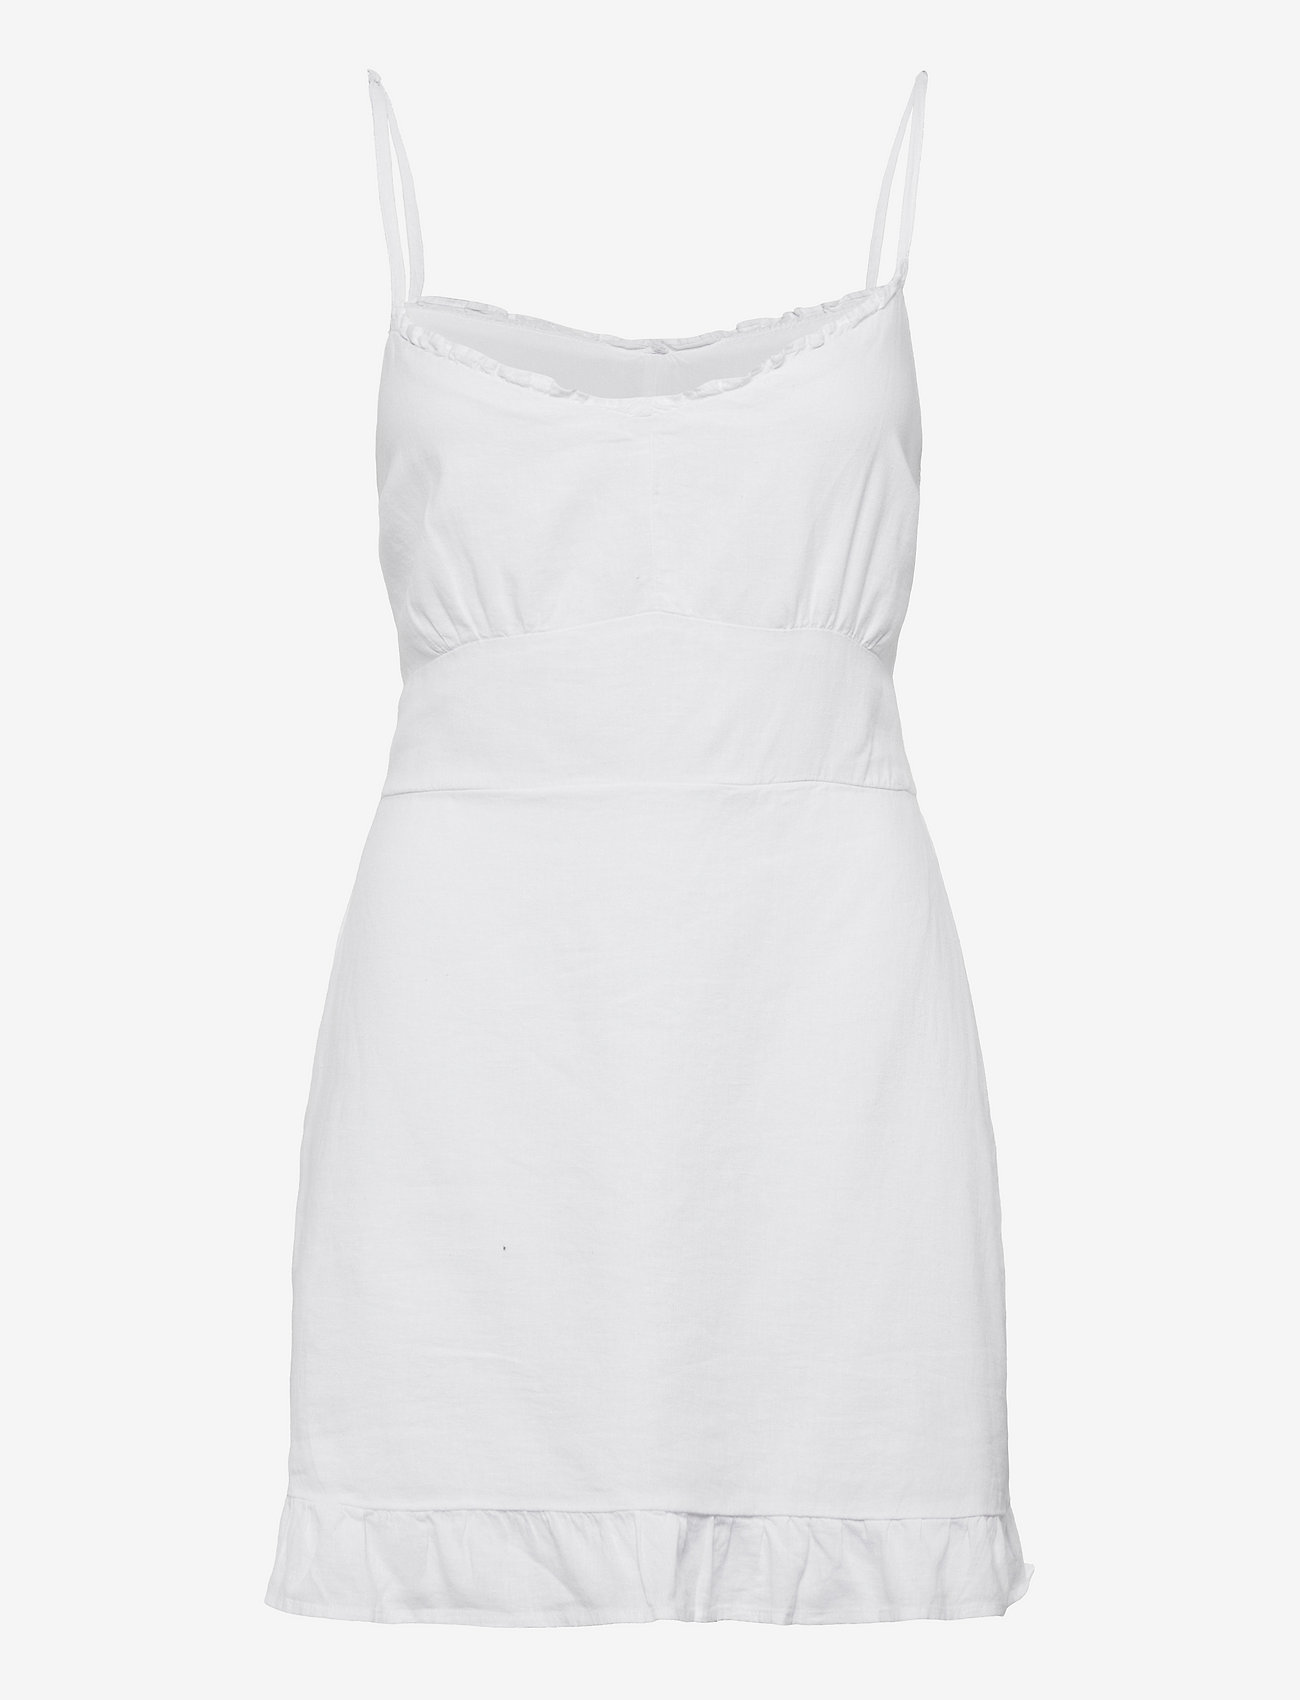 Abercrombie ☀ Fitch Anf Womens Dresses ...